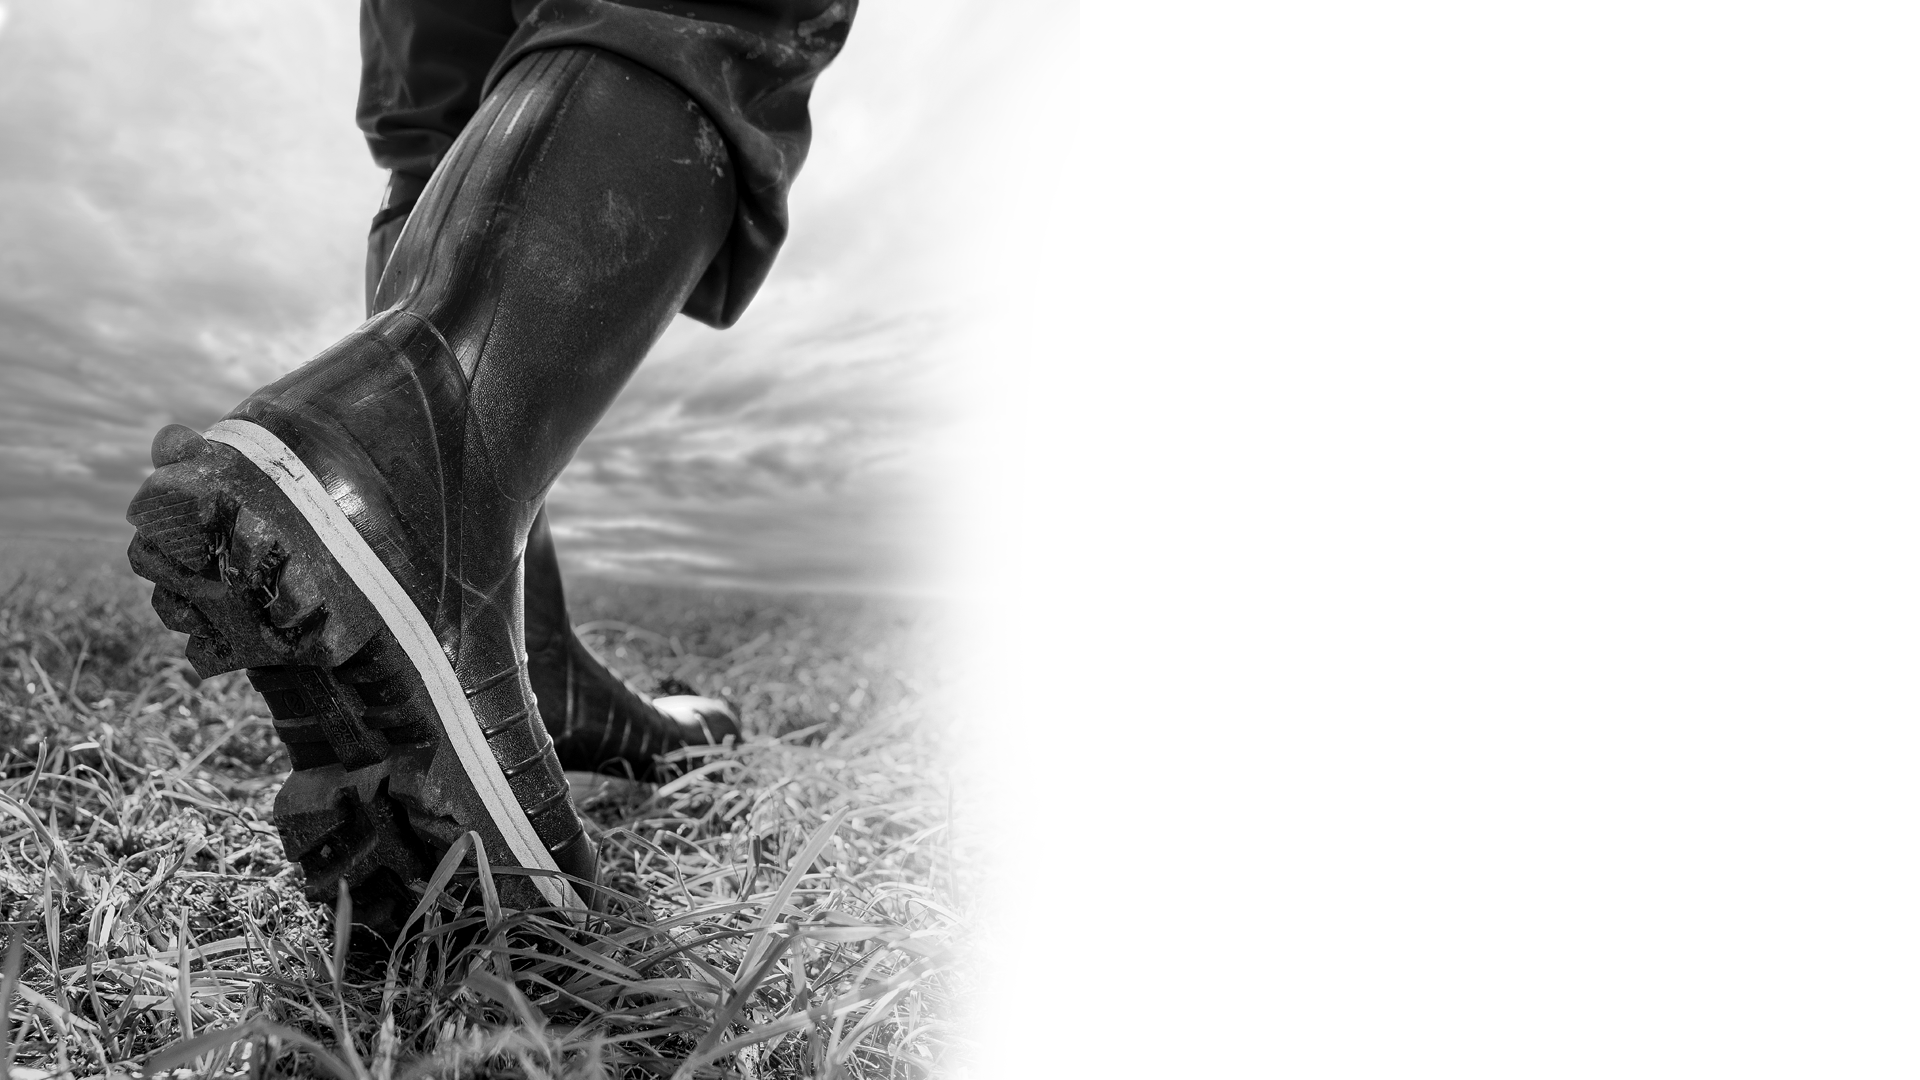 image of man walking through field in boots